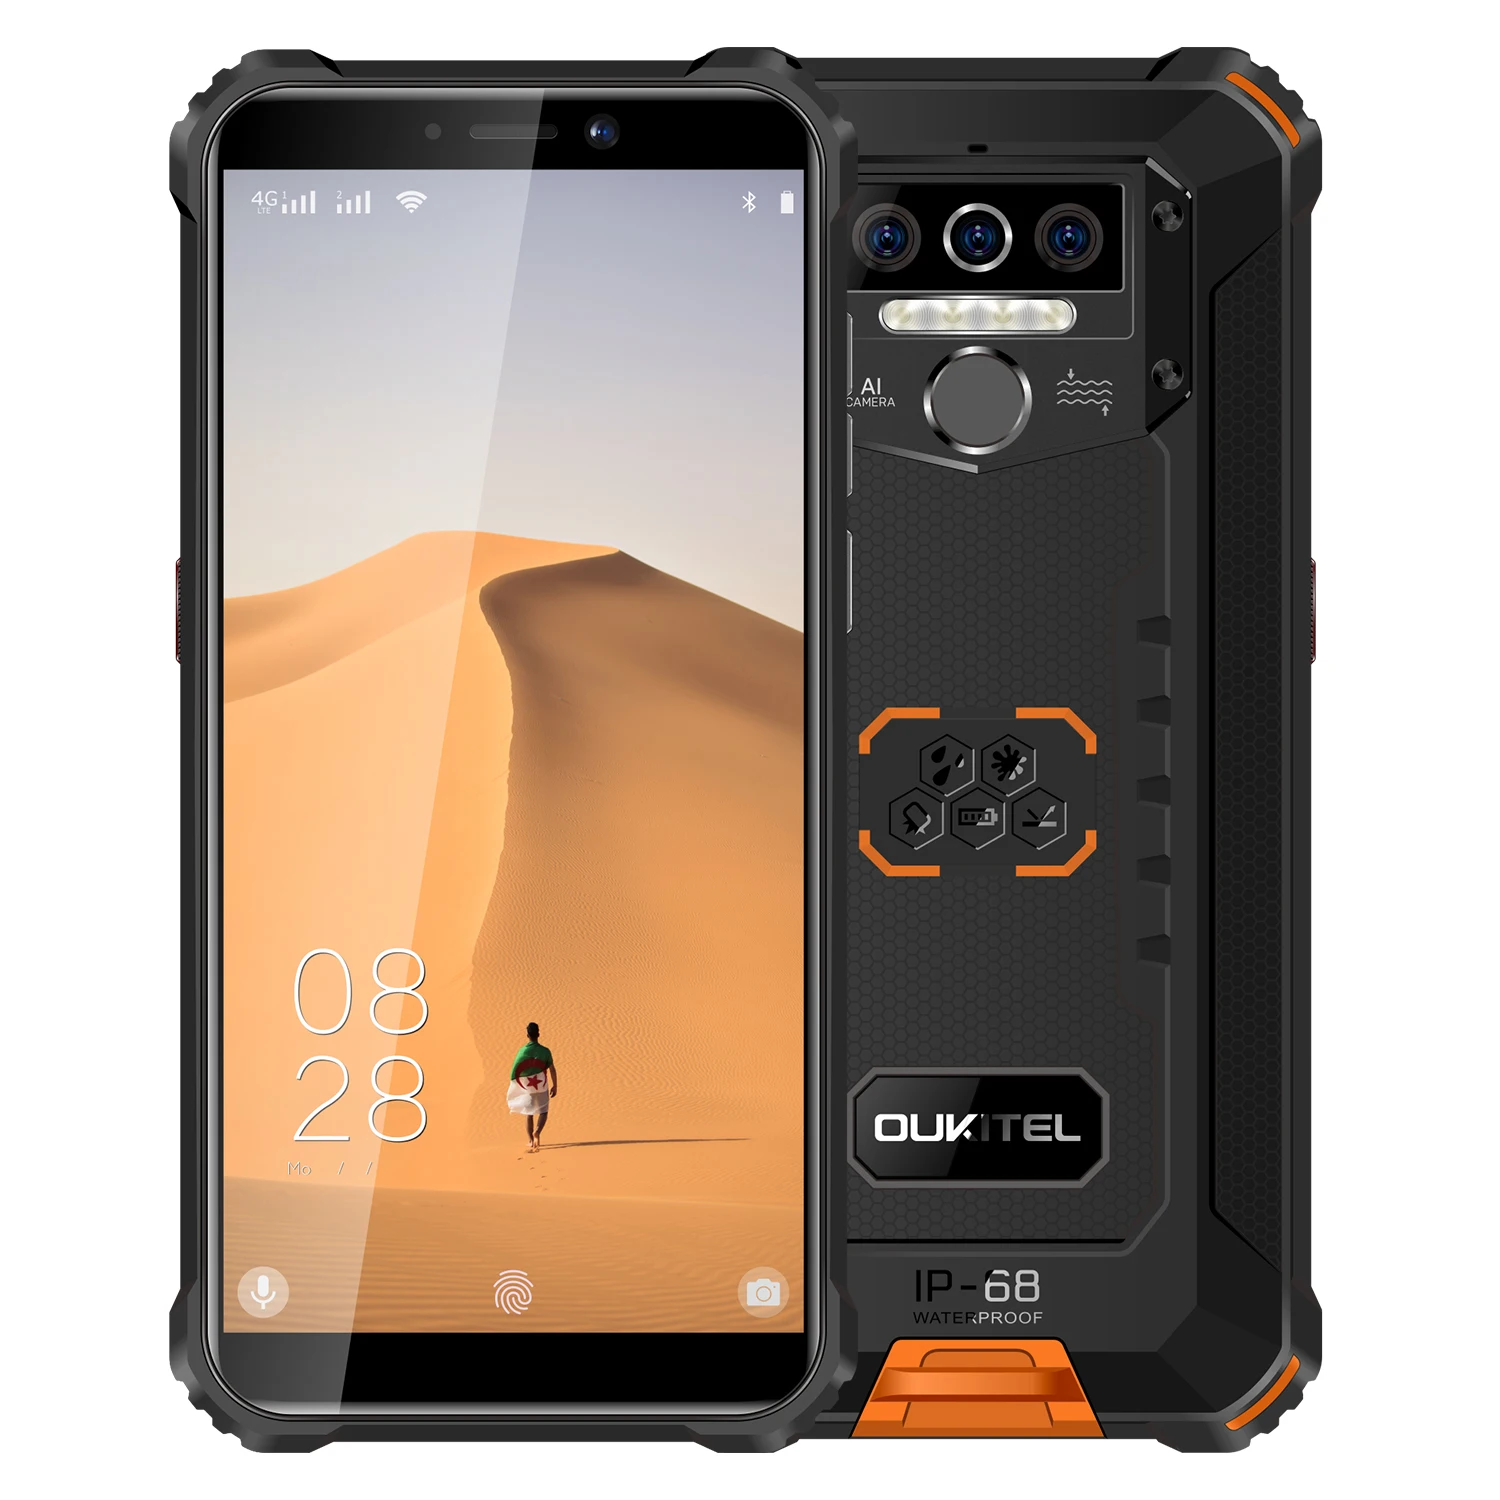 

IP68 Waterproof smartphone OUKITEL WP5 5.5 inch Android 9.0 Quad Core 4GB+32GB 13MP 8000mAh 5V/2A rugged Mobile Phone, Orange,red